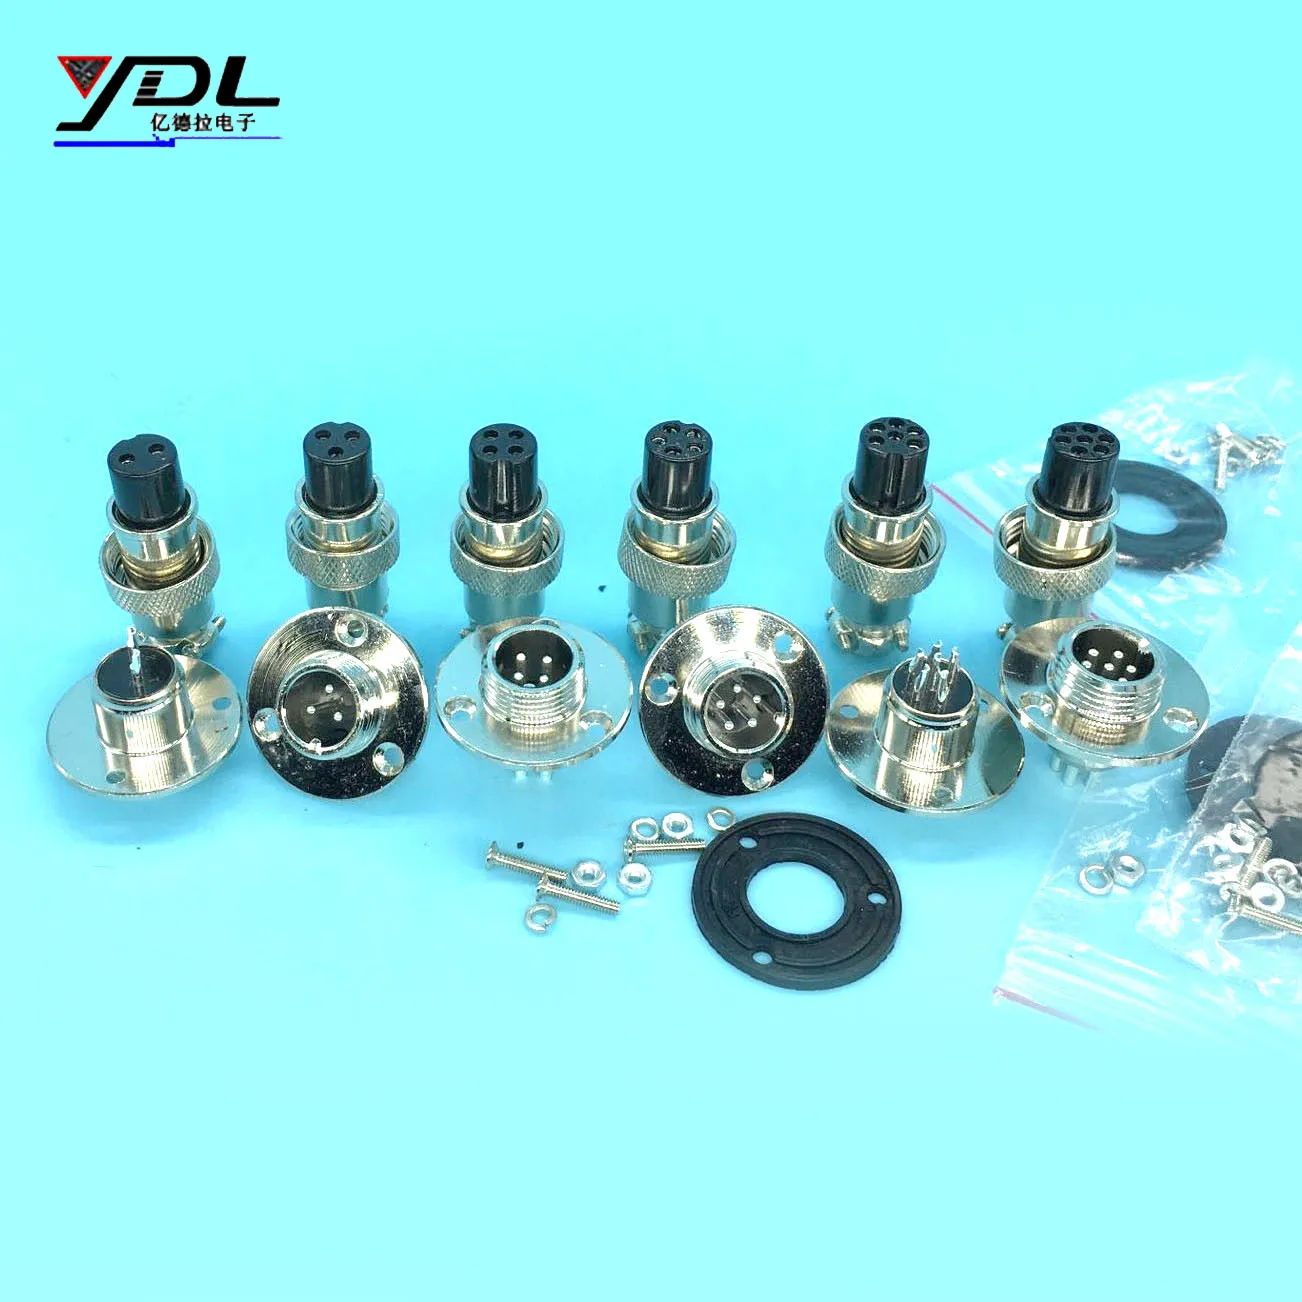 

2 Set GX12 2pin 3pin 4pin 5pin 6pin 7 Pin Male Female 12mm Flange 3 holes Aviation Socket Plug Panel Connector With screw washer